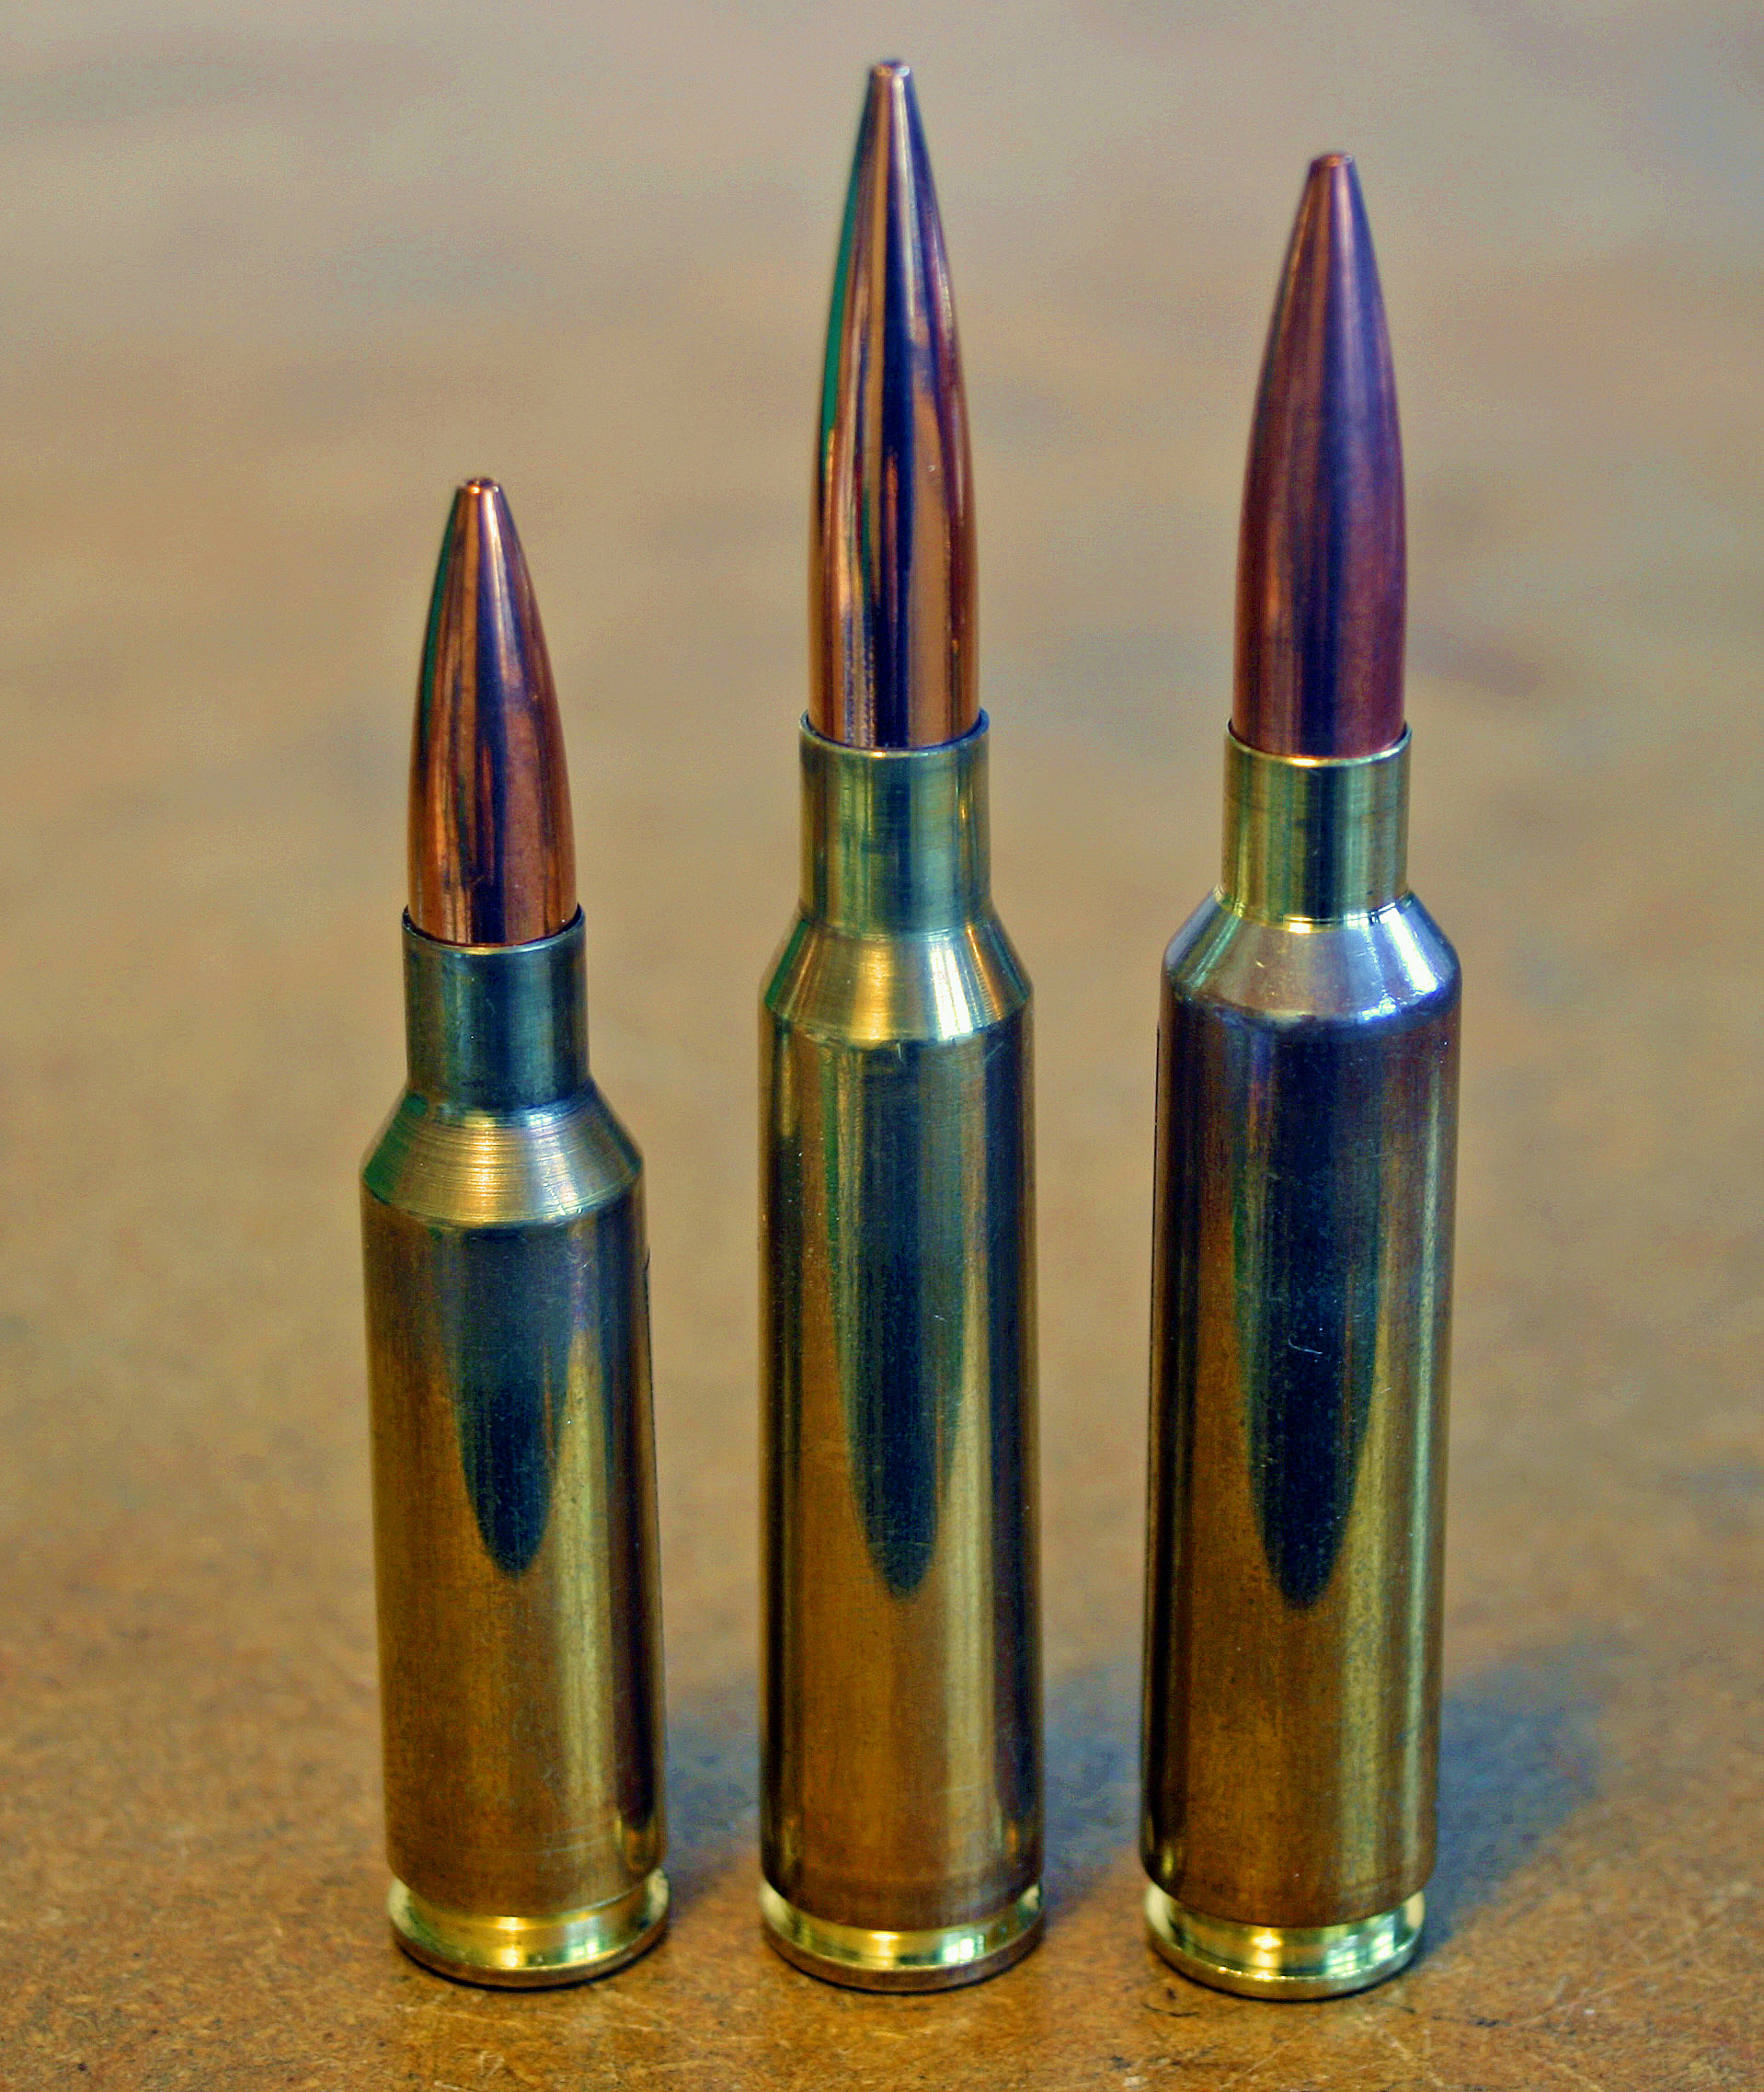 The 6.5mm x 284 norma began as a wildcat cartridge by necking down the 284 ...